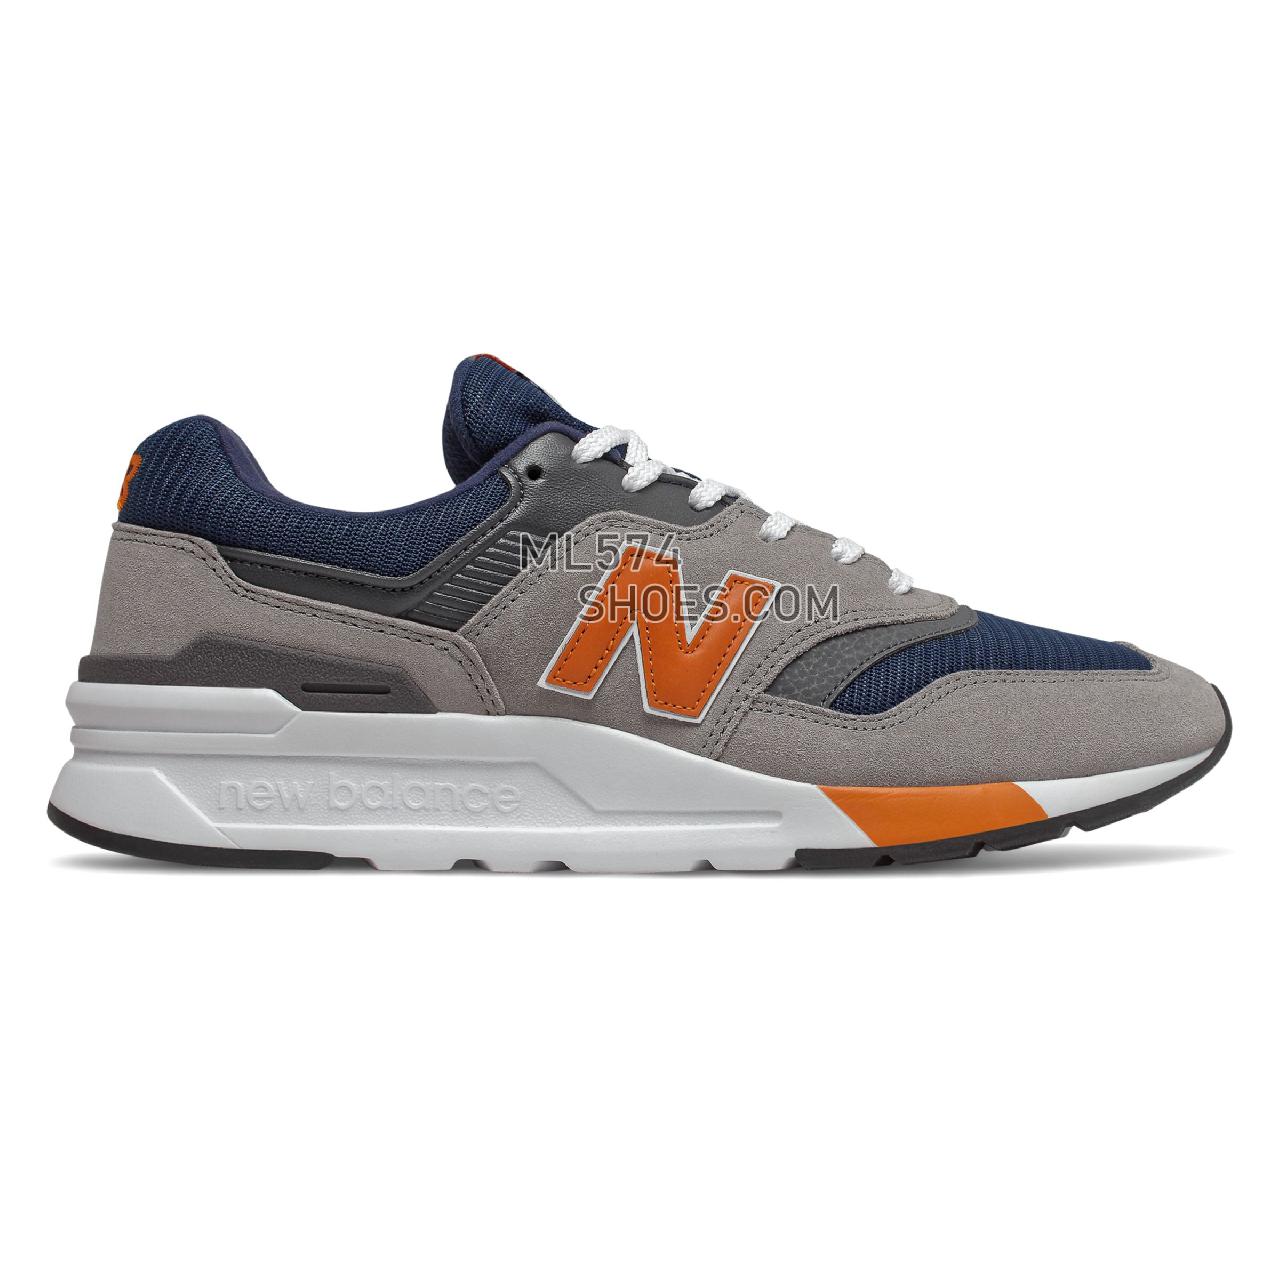 New Balance 997H - Men's 997H Classic - Marblehead with Natural Indigo - CM997HEX